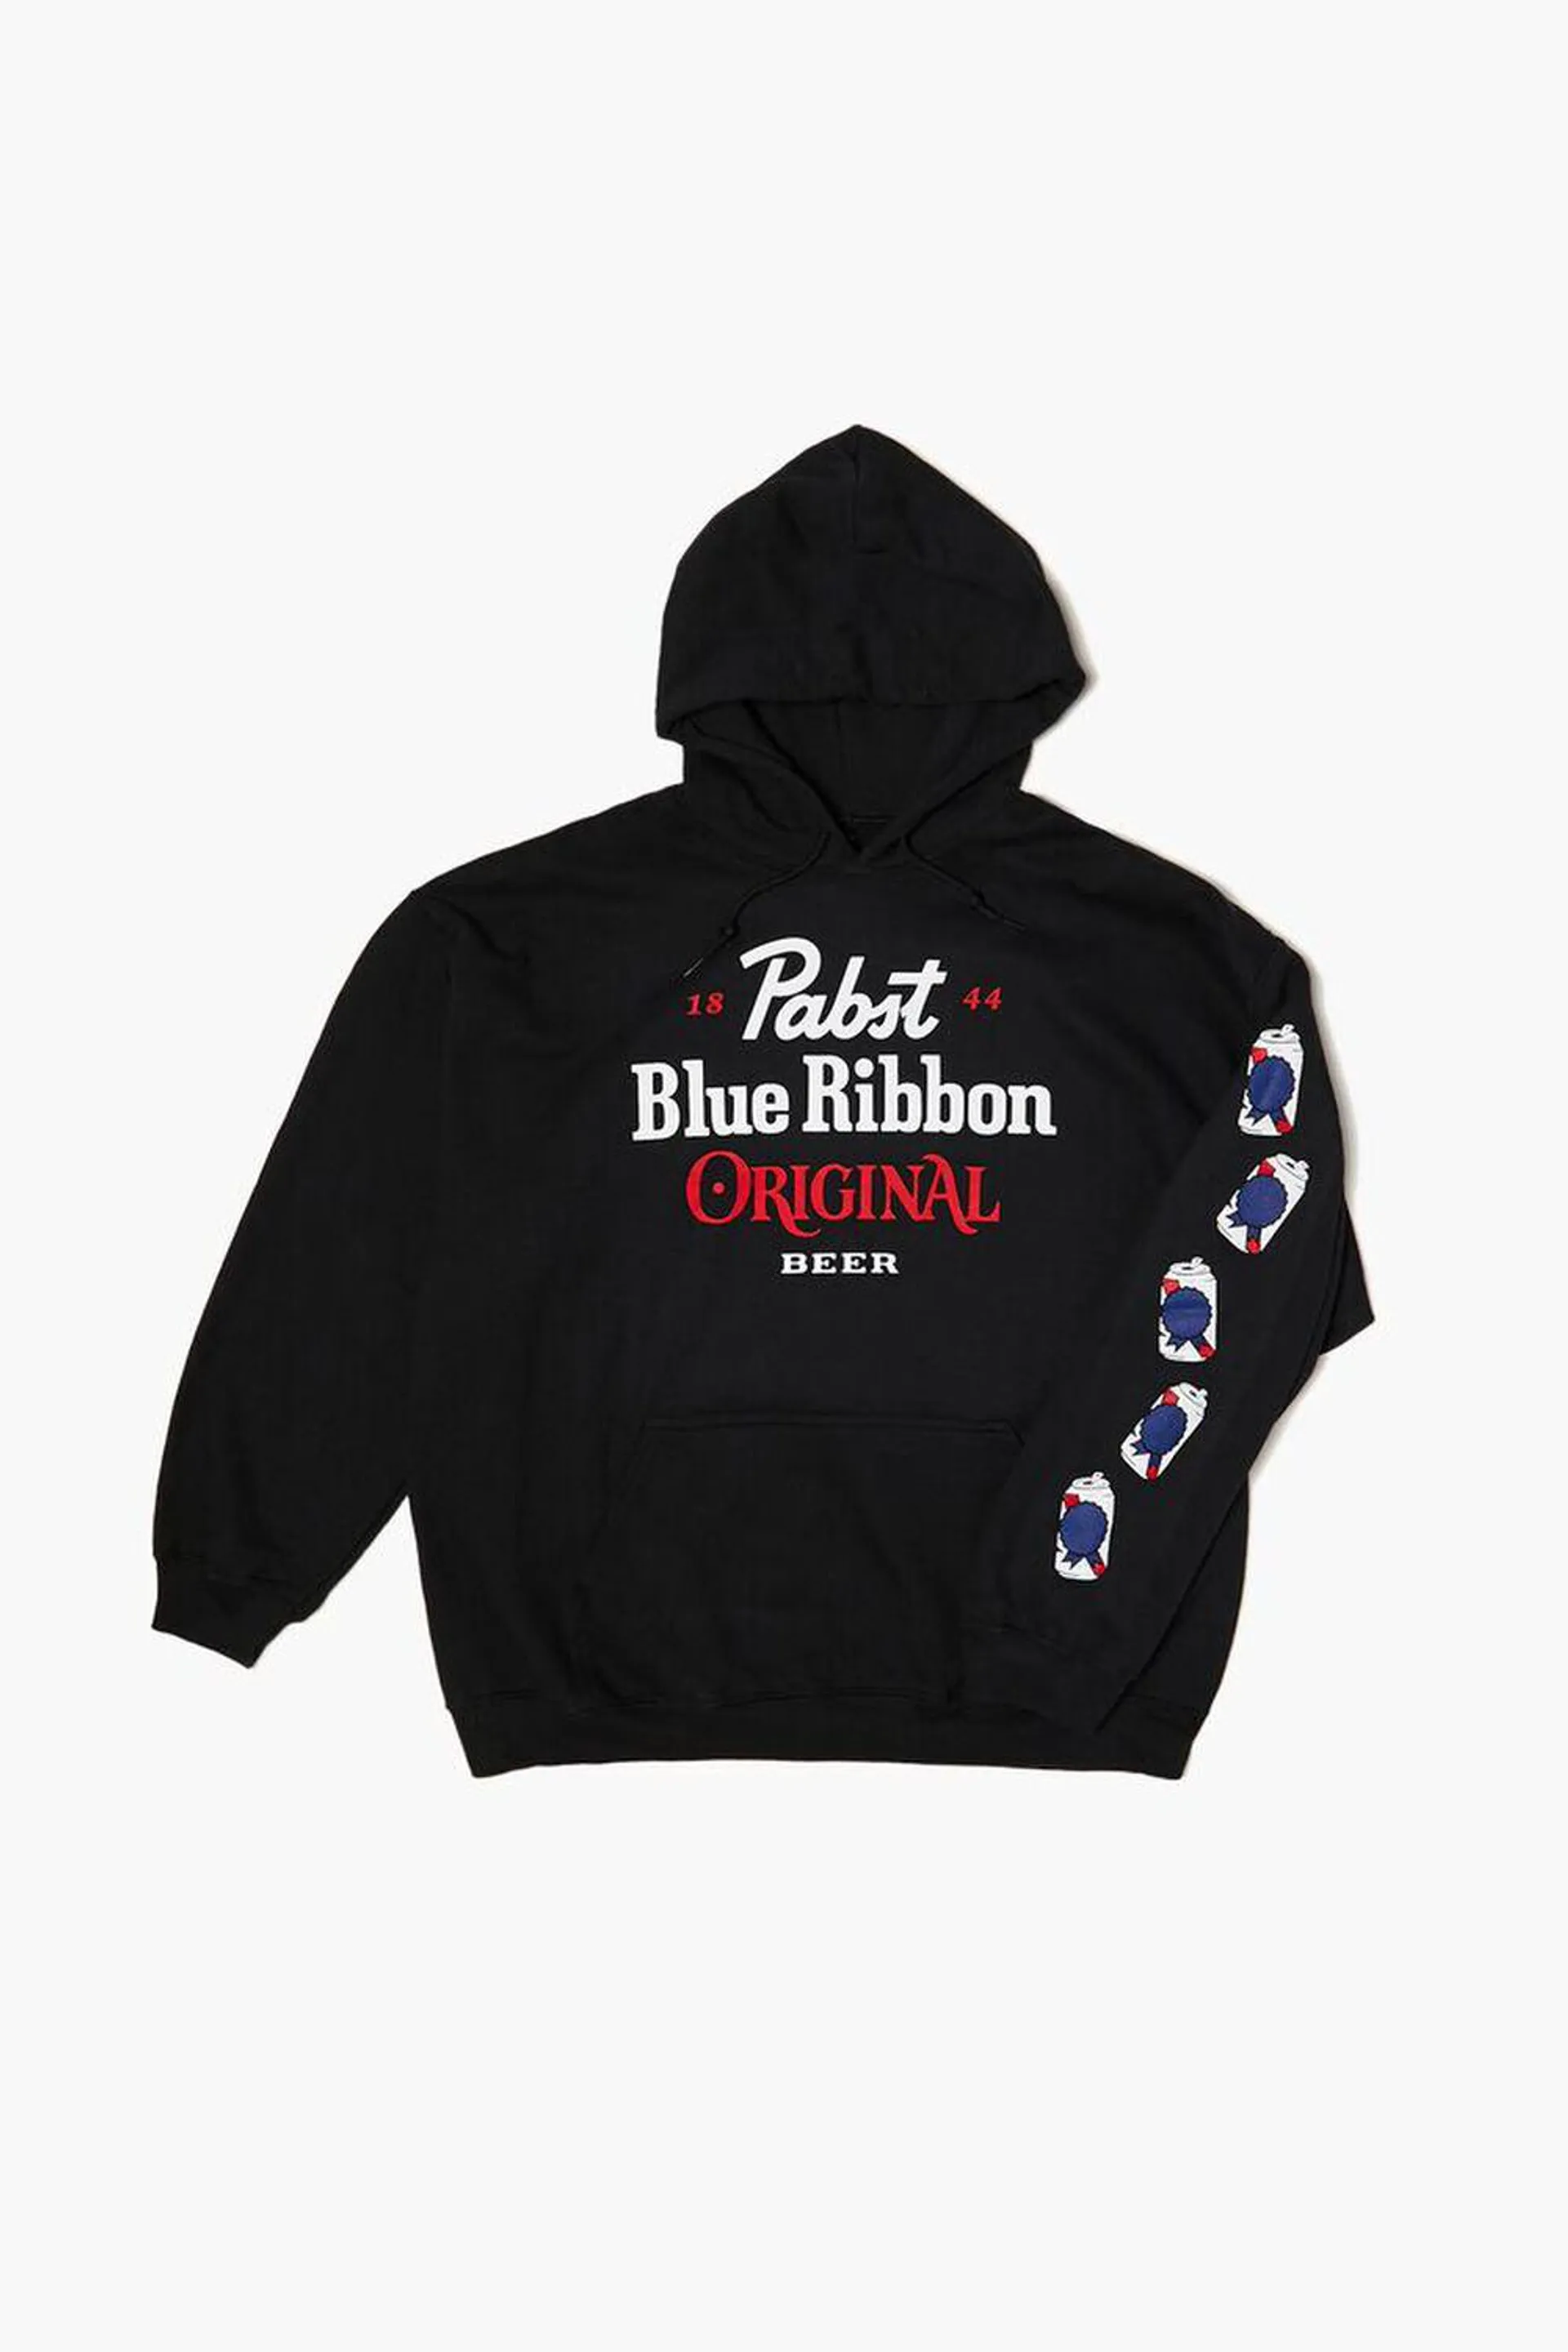 Pabst Blue Ribbon Graphic Hoodie